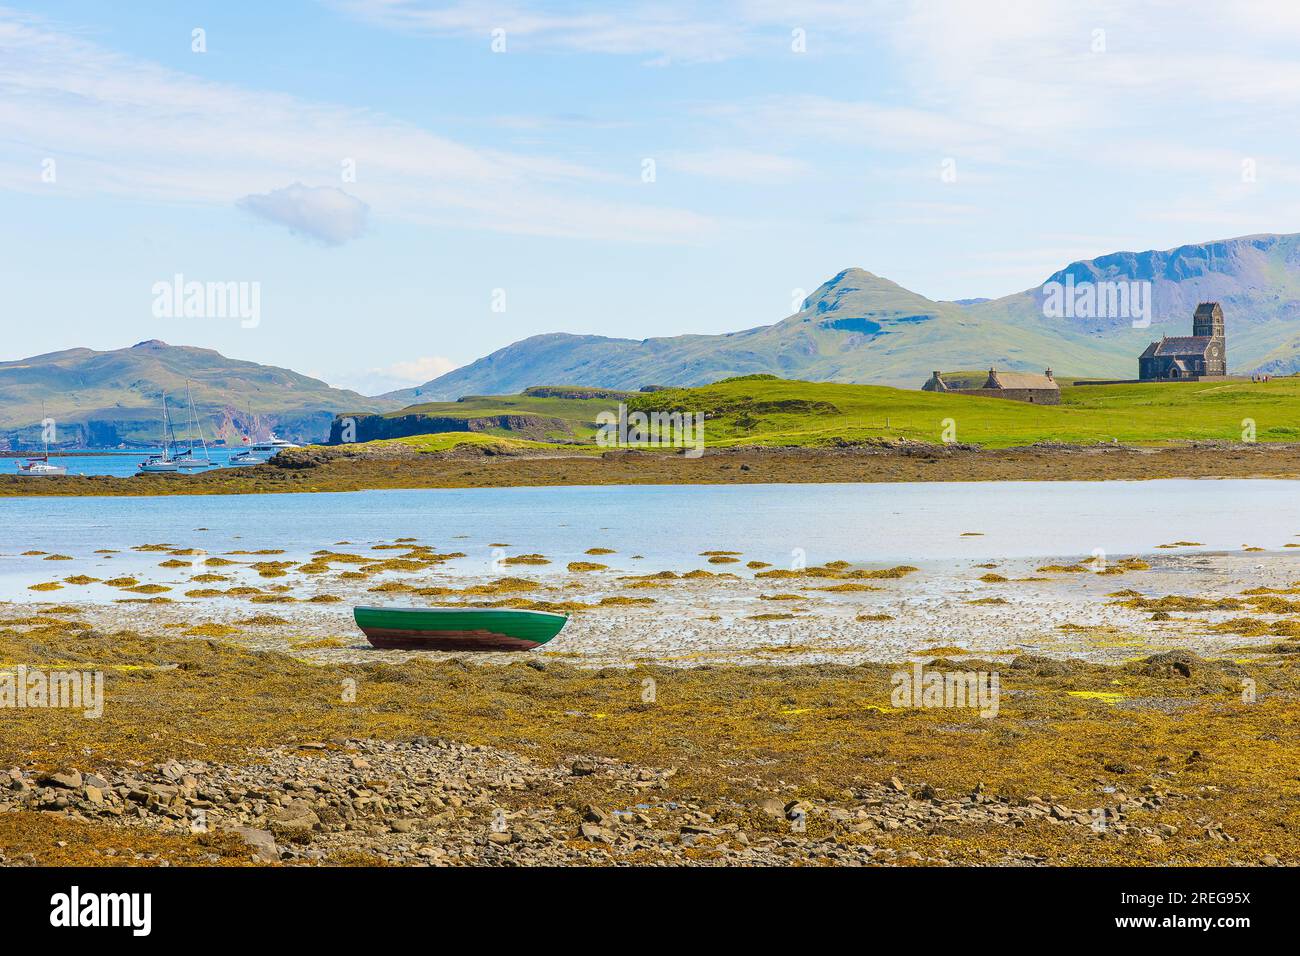 The beautiful and remote Isle of Canna in Summer time with views across the bay and to the larger Isle of Rum.   Small Isles, Scotland.  Horizontal. Stock Photo